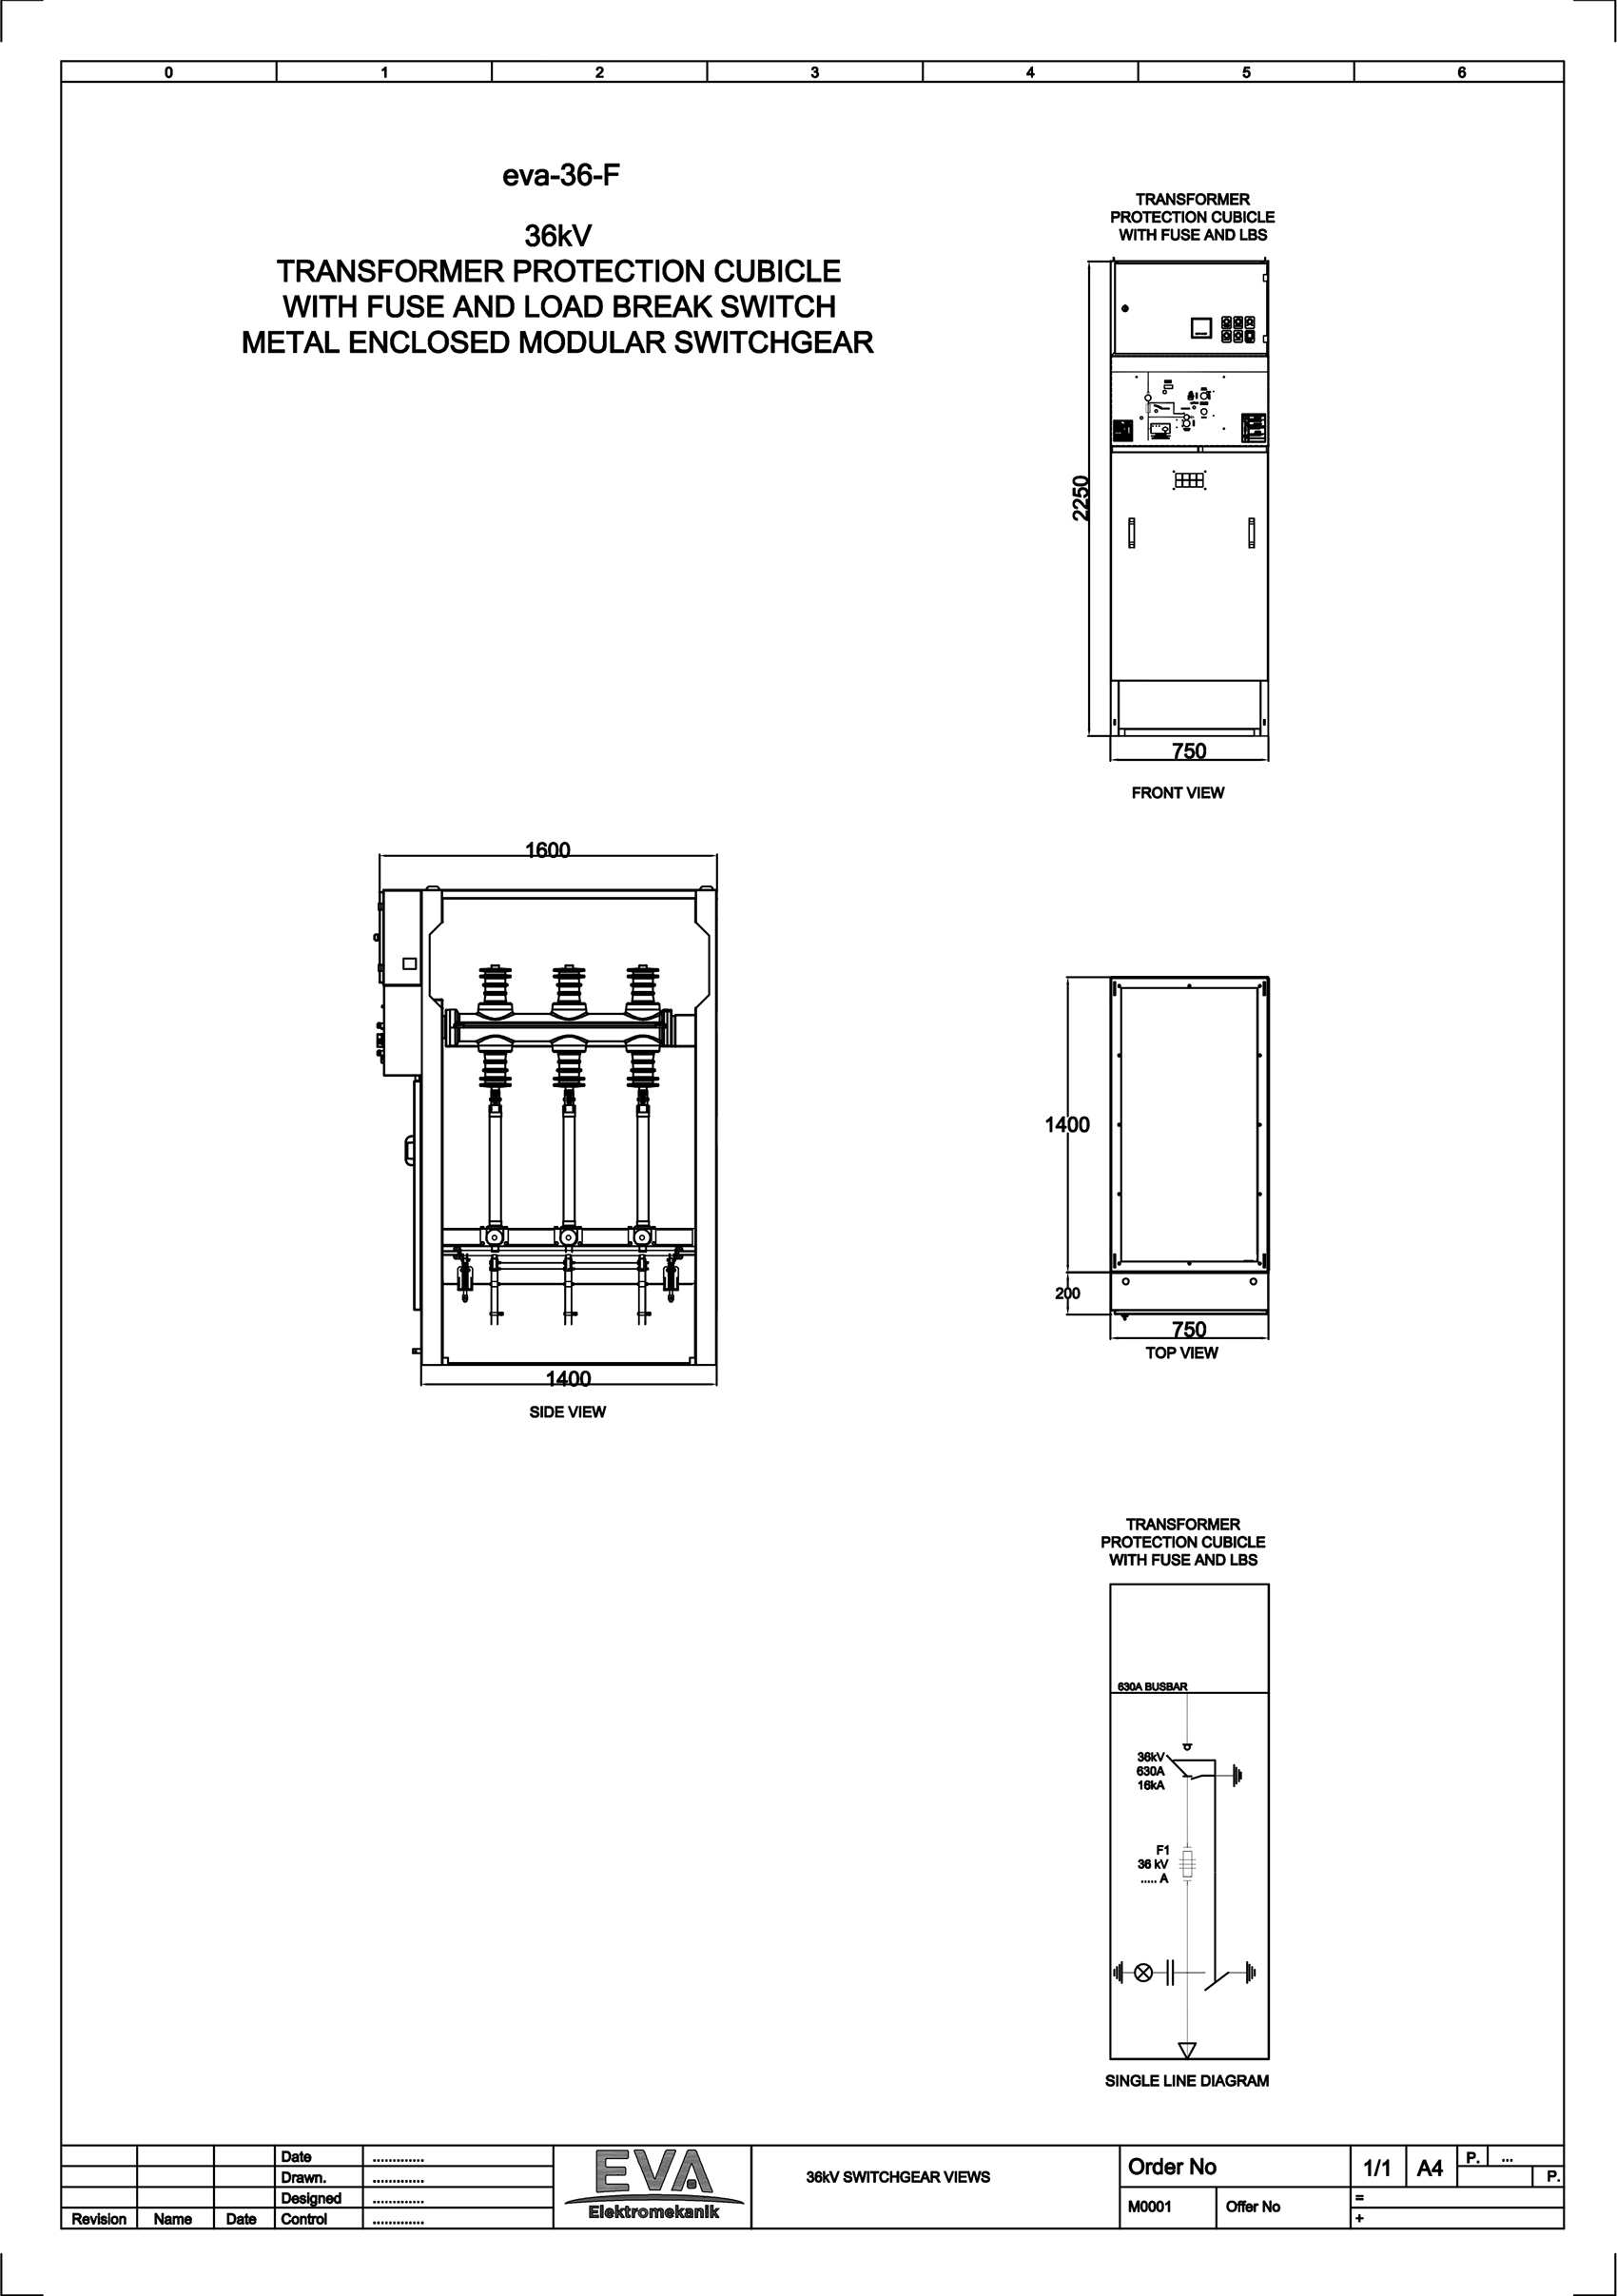 Transformer Protection Cell with Fuse and Load Break Switch (LBS)